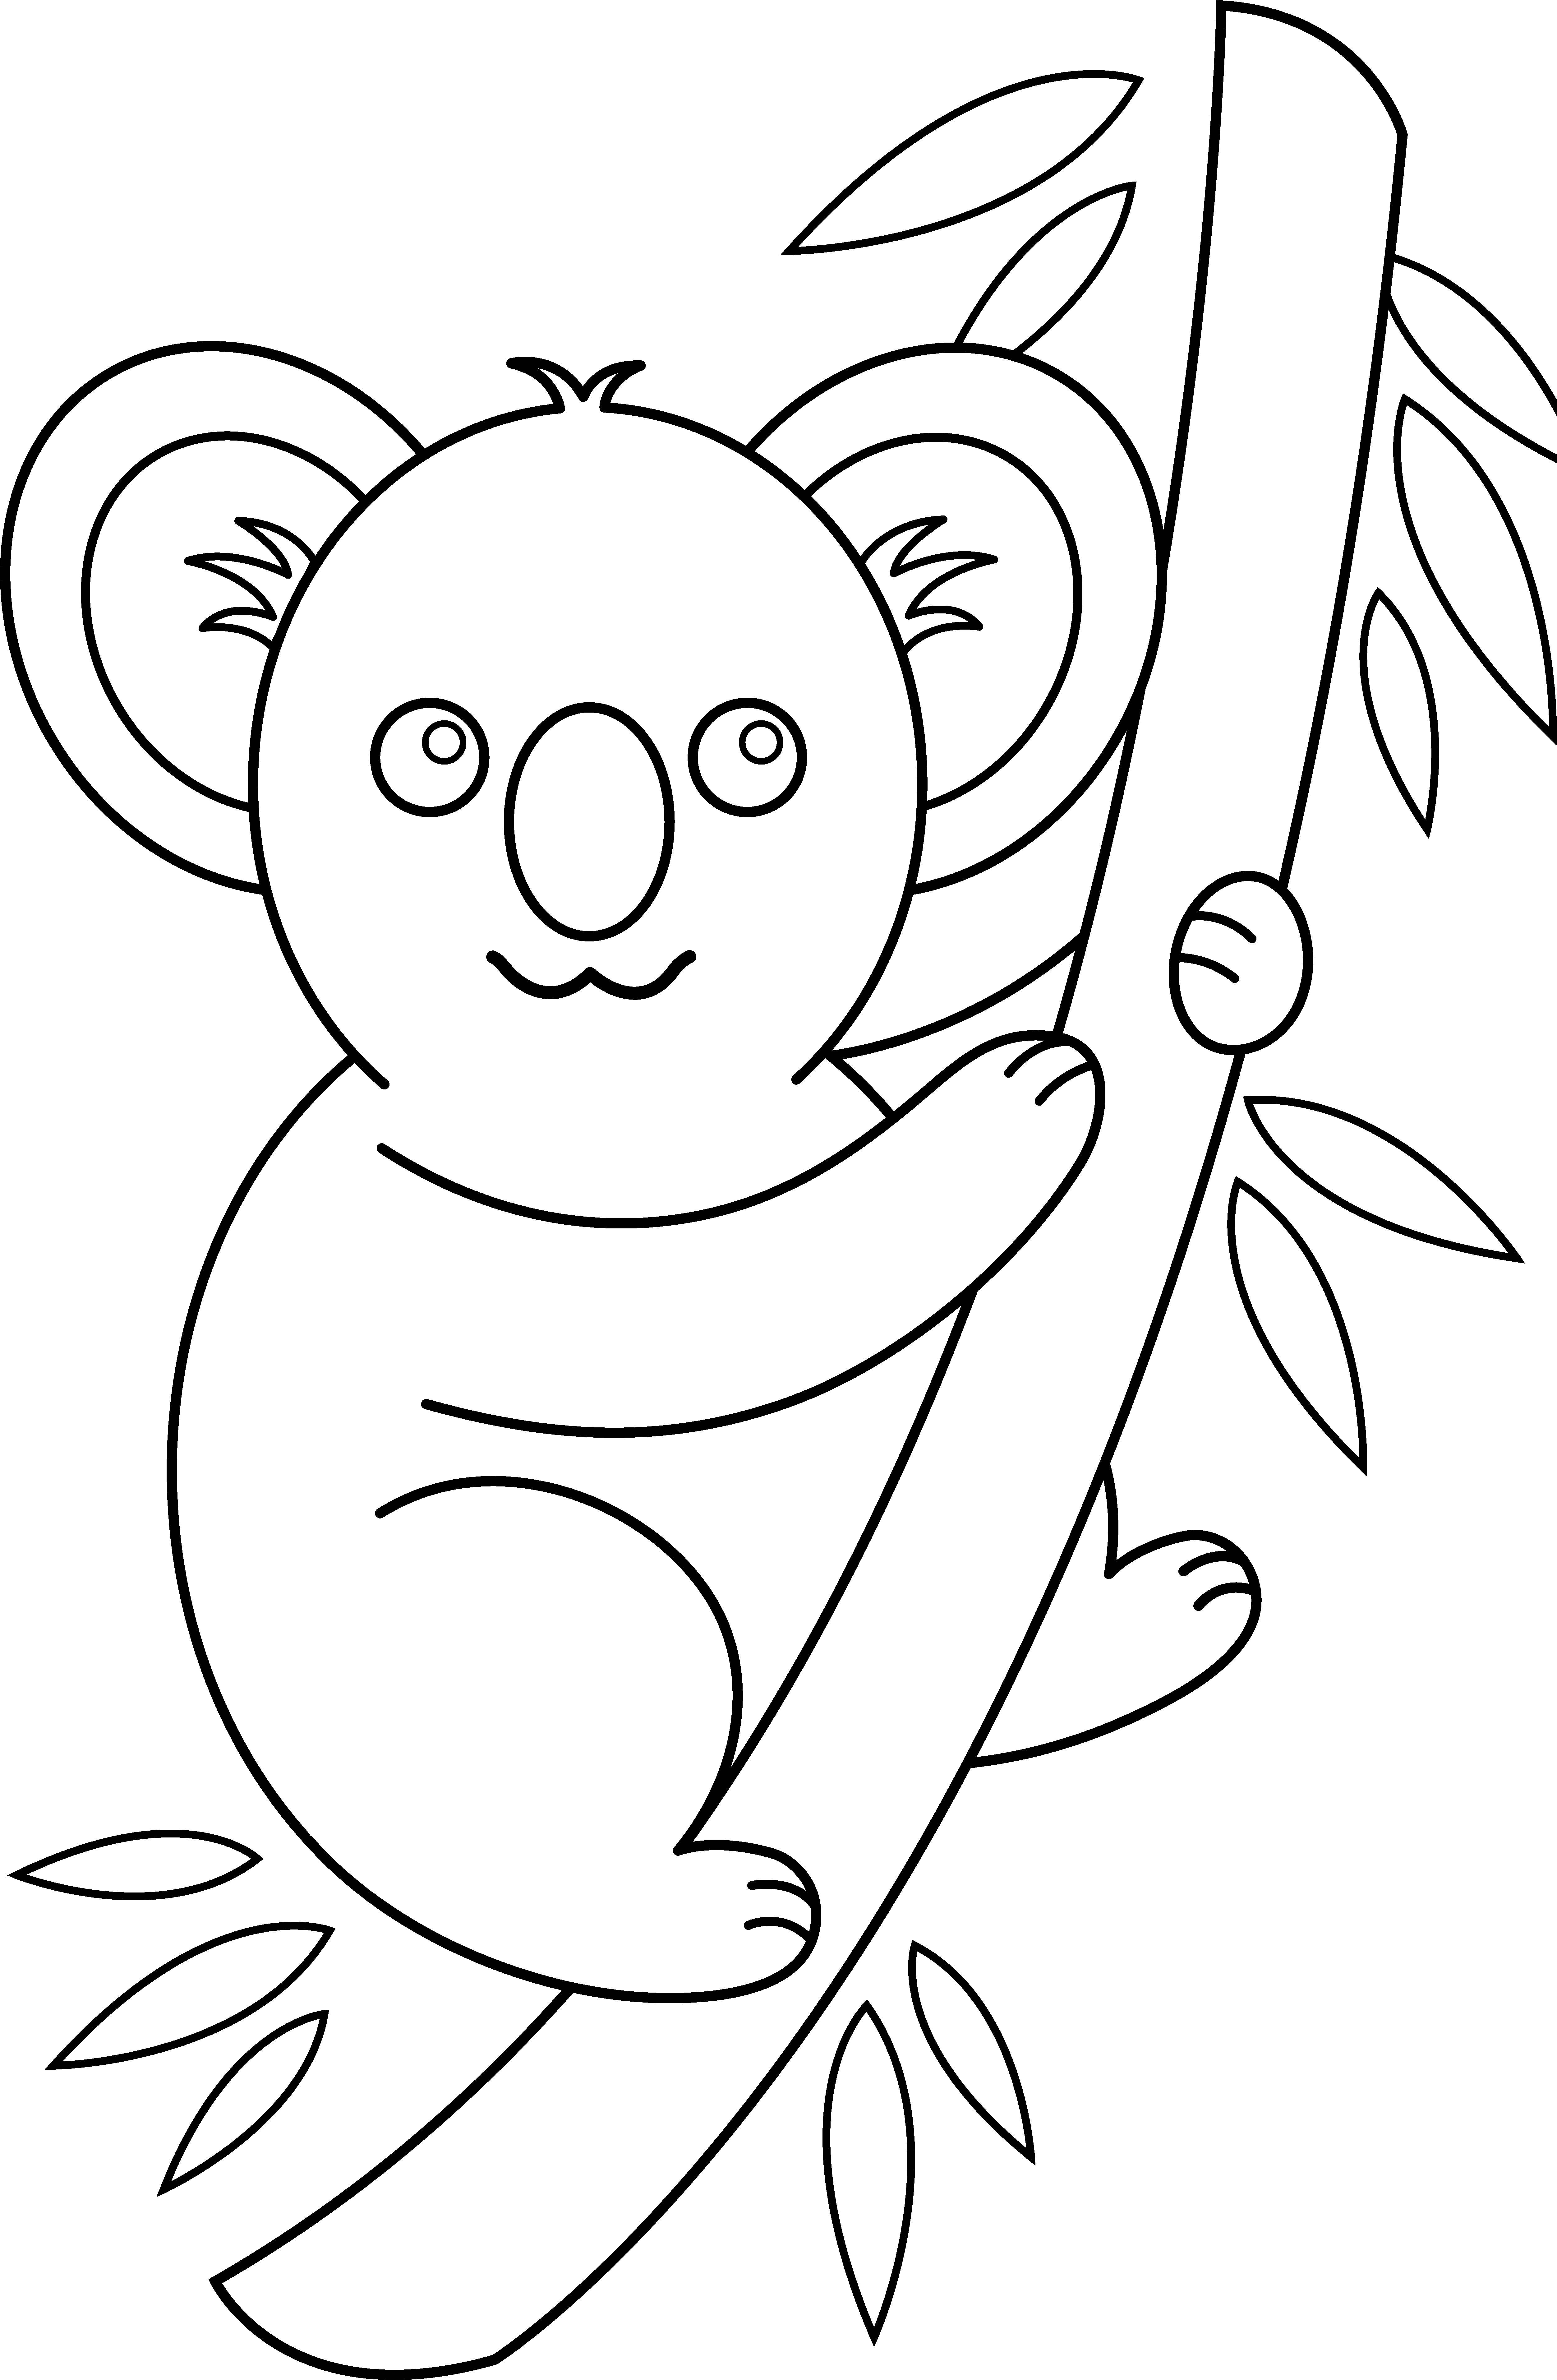 koala outline Colouring Pages